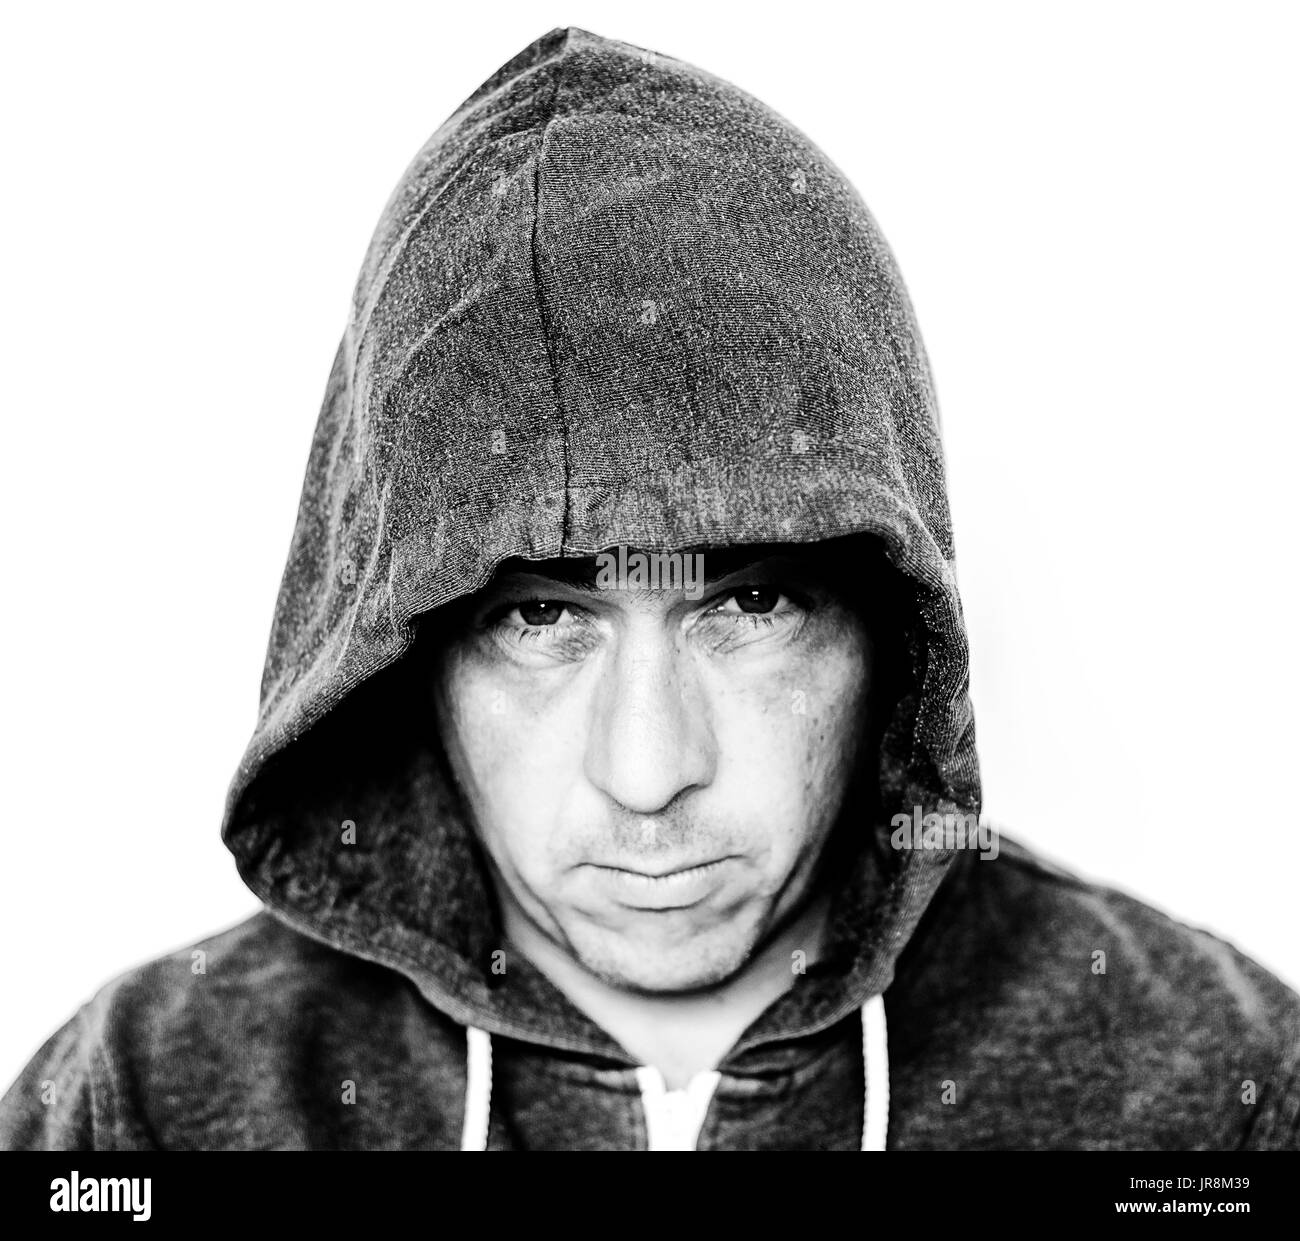 Man wearing a grey hooded top showing a mean grungy face with added grunge effect in black and white Stock Photo